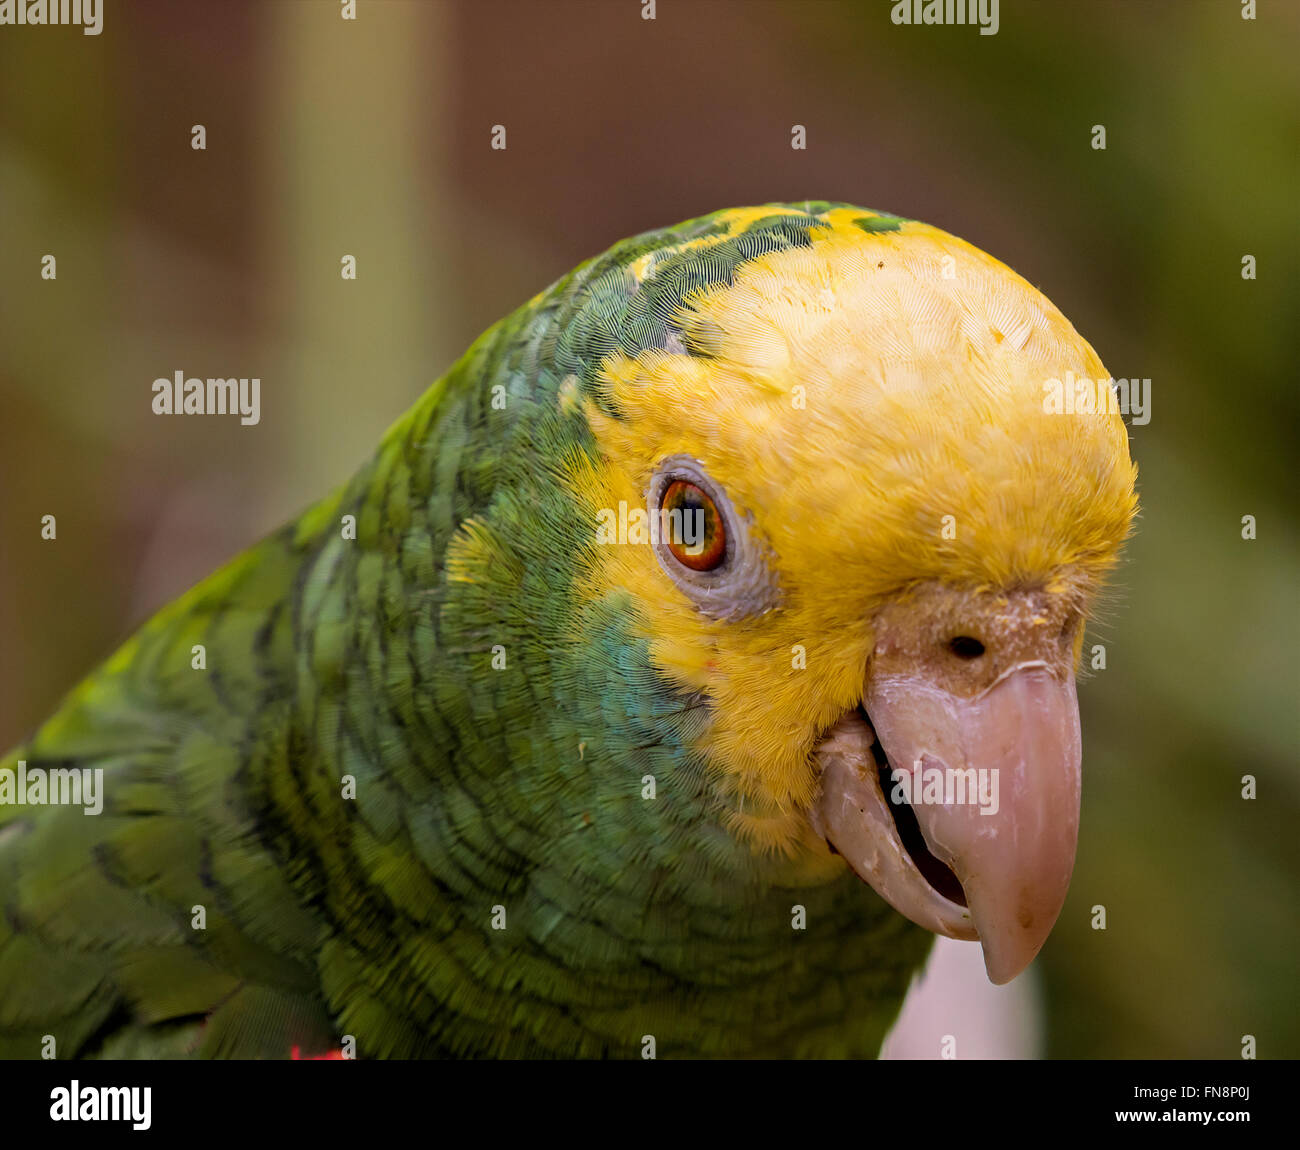 Amazon yellow-headed parrot photographed / pictured at Maleny Botanoc Garden Aviary Queensland, Australia Stock Photo